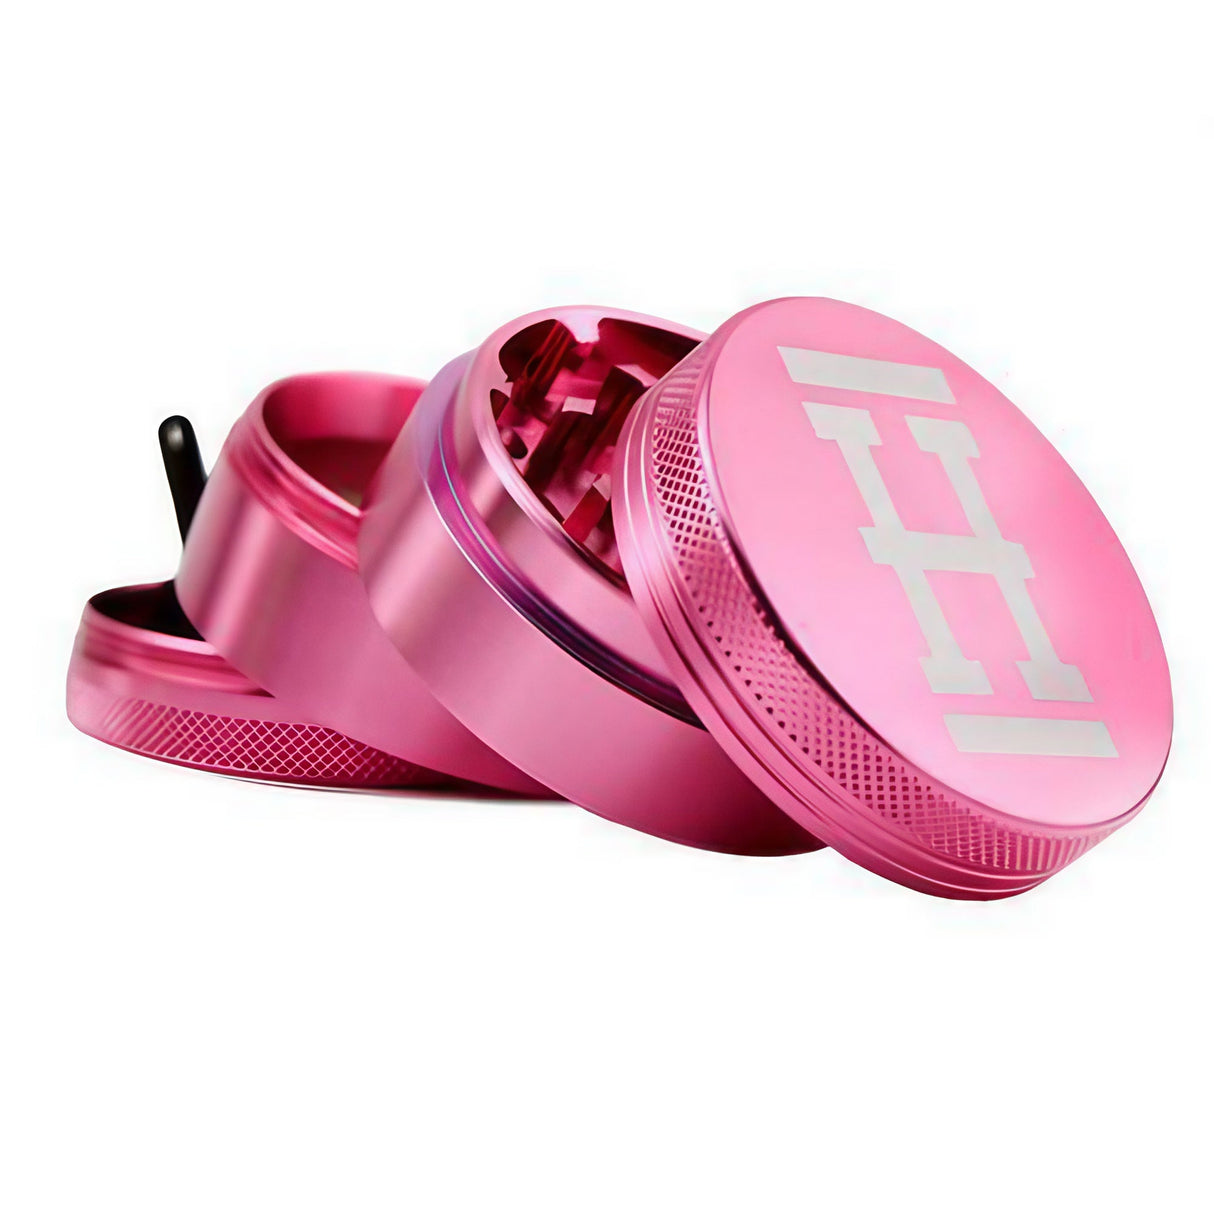 Hemper Aluminum Grinder 4 Piece in Pink, Large Size, 2.2" Diameter, Angled View